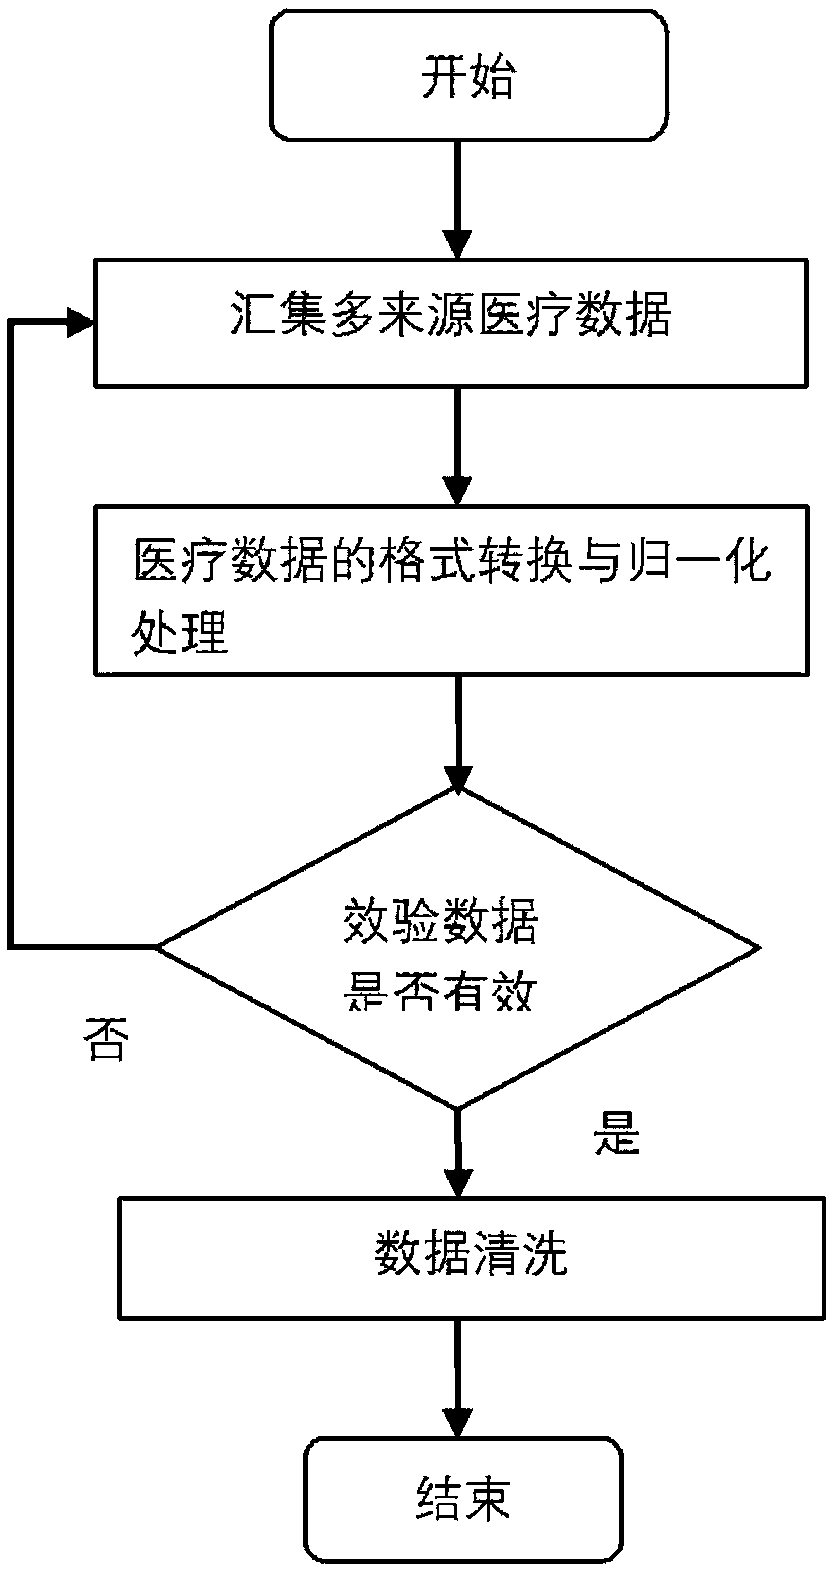 Medical data decision support method and system